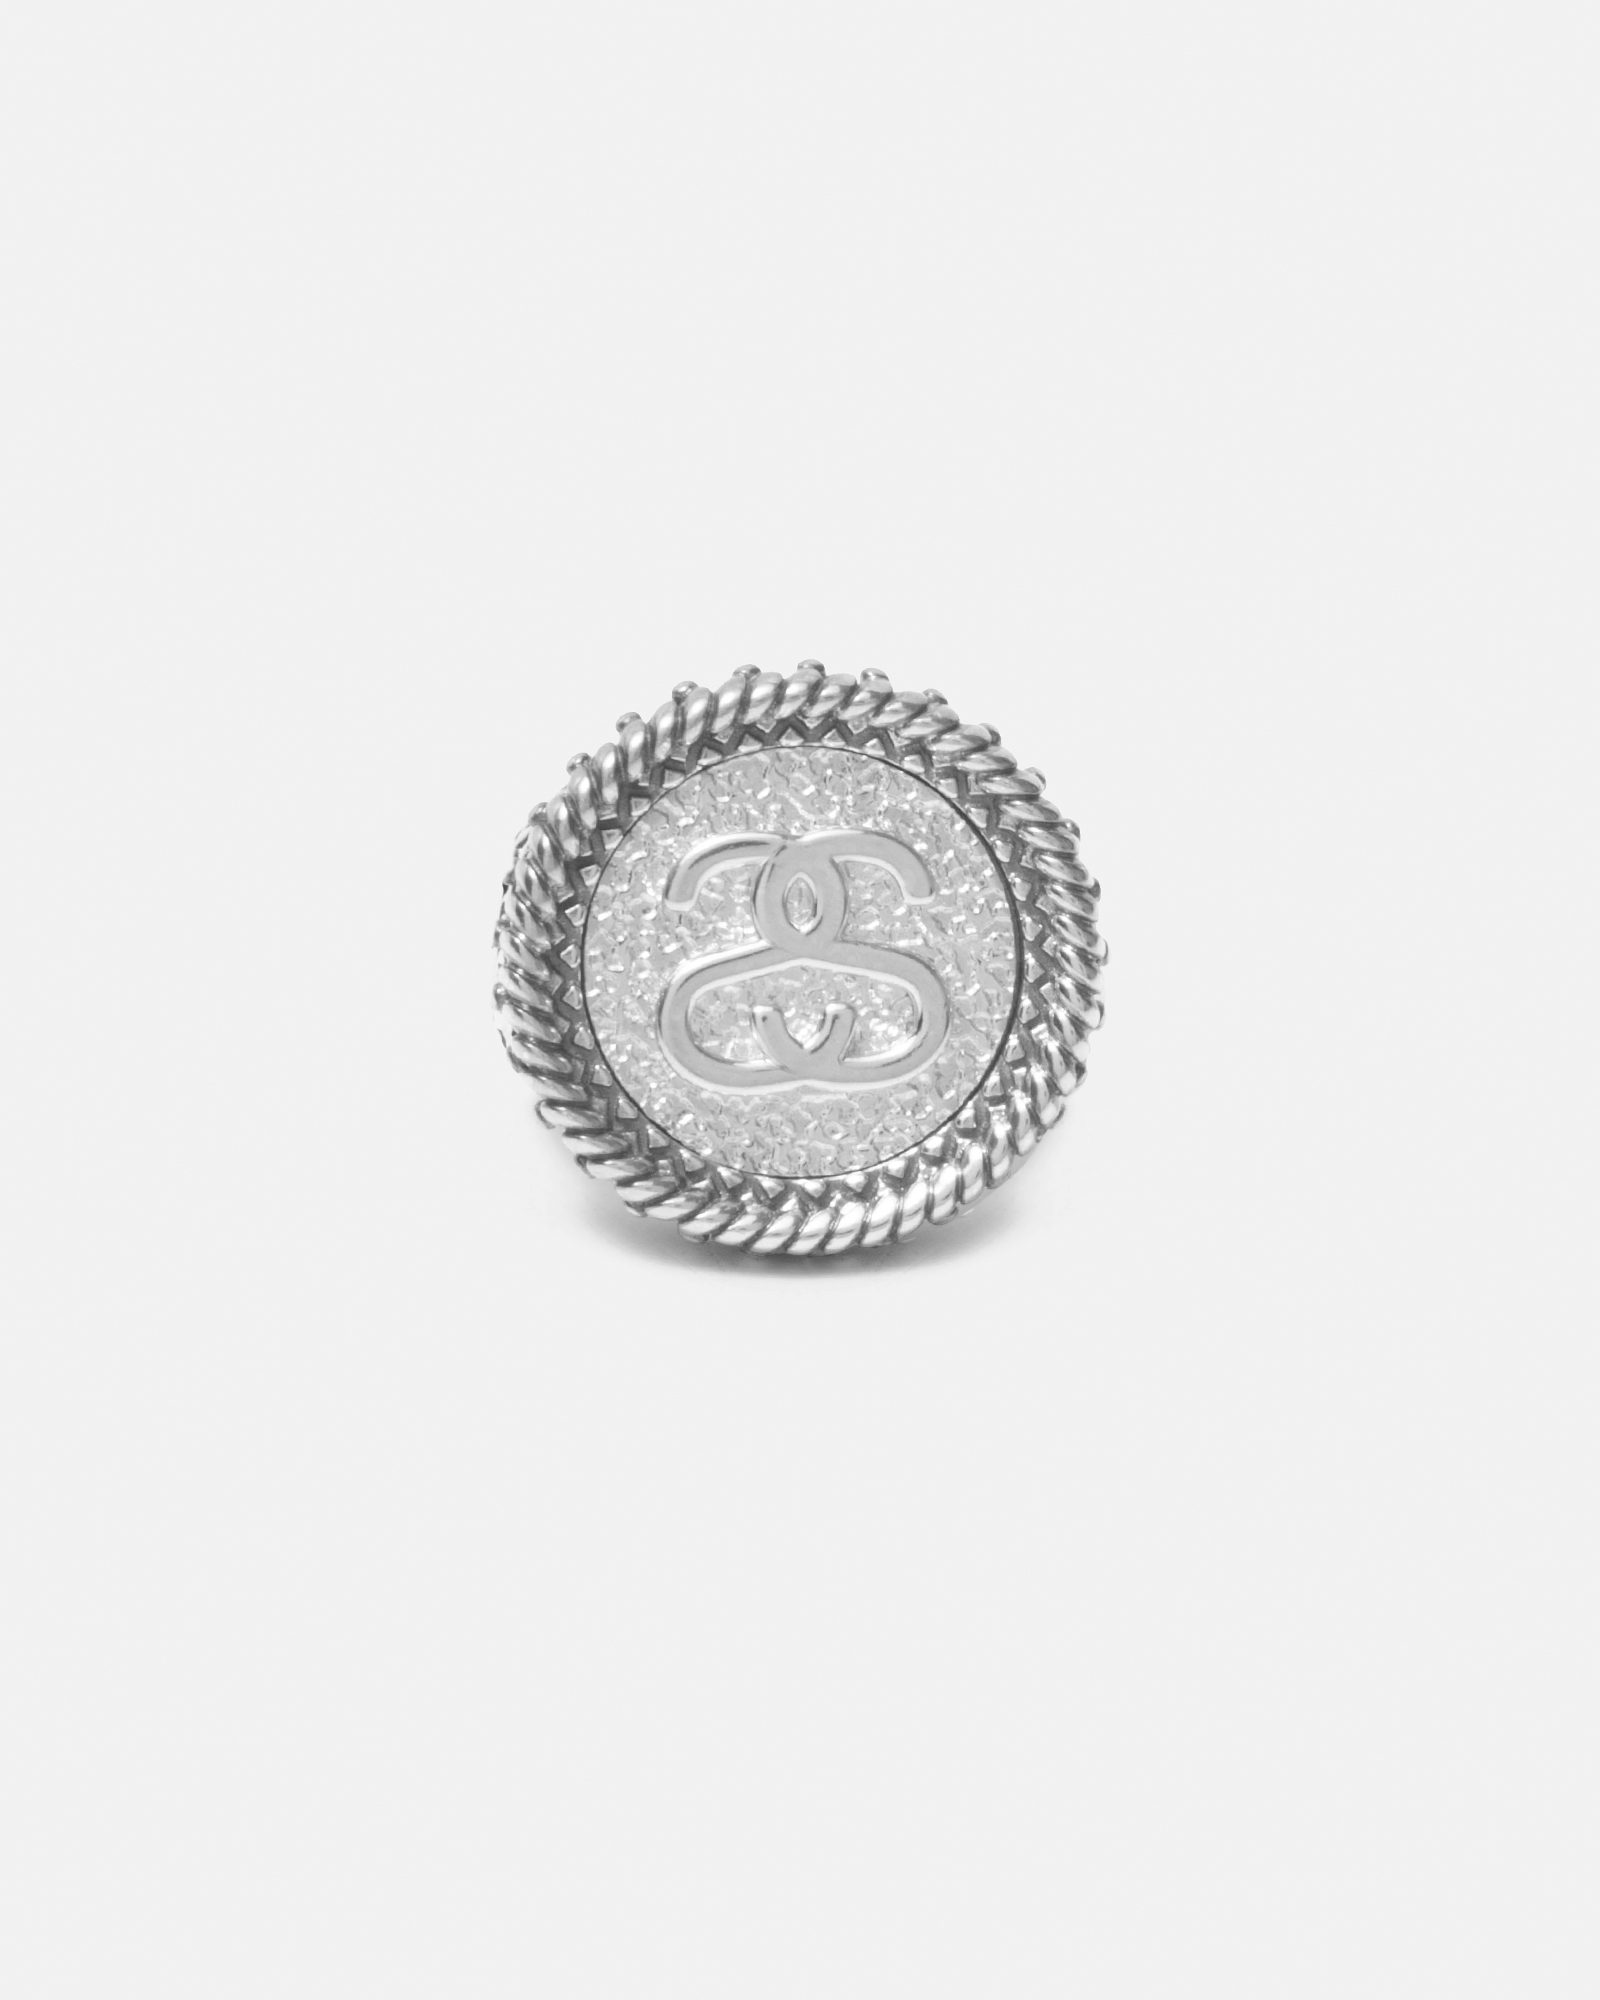 Of Course, Stüssy's First Jewelry Collection Has 8-Ball Earrings